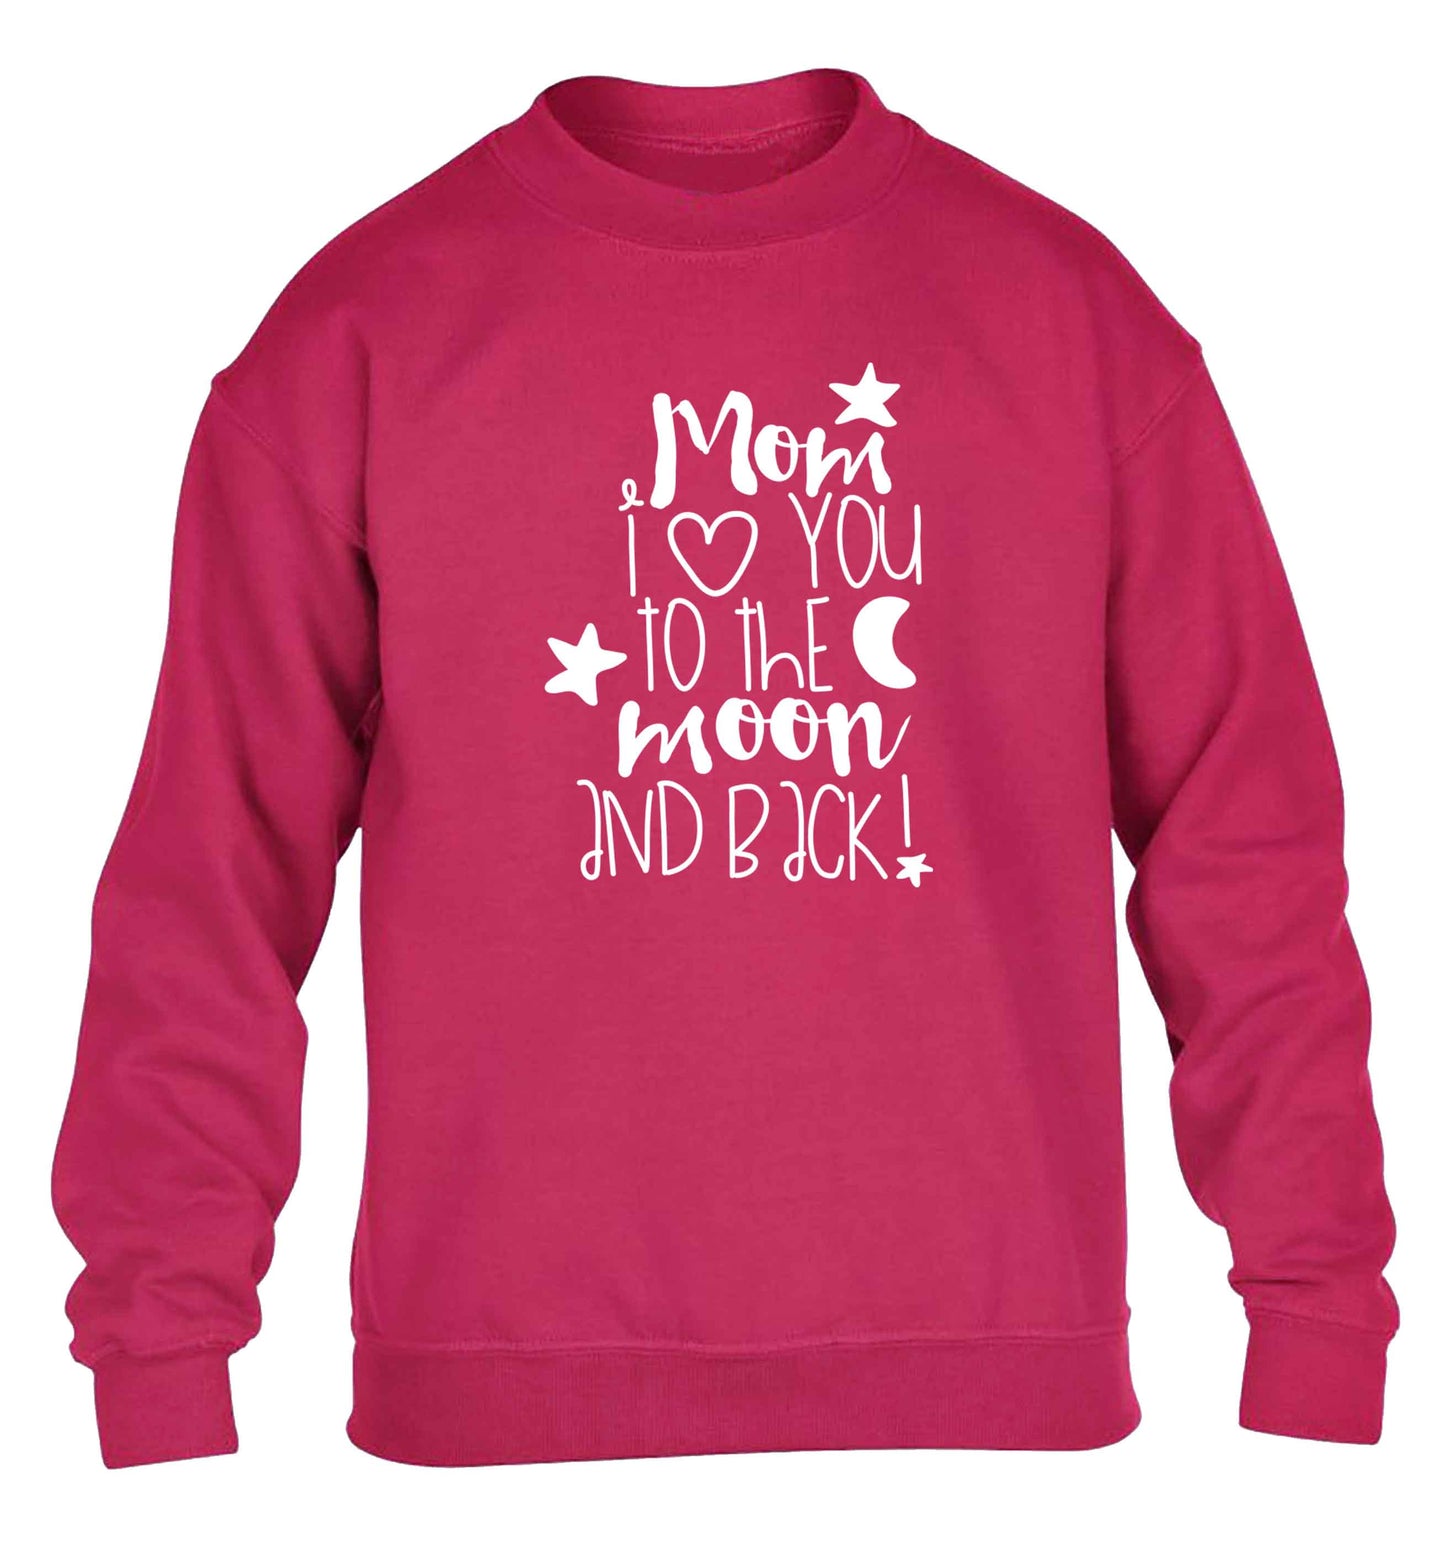 Mom I love you to the moon and back children's pink sweater 12-13 Years